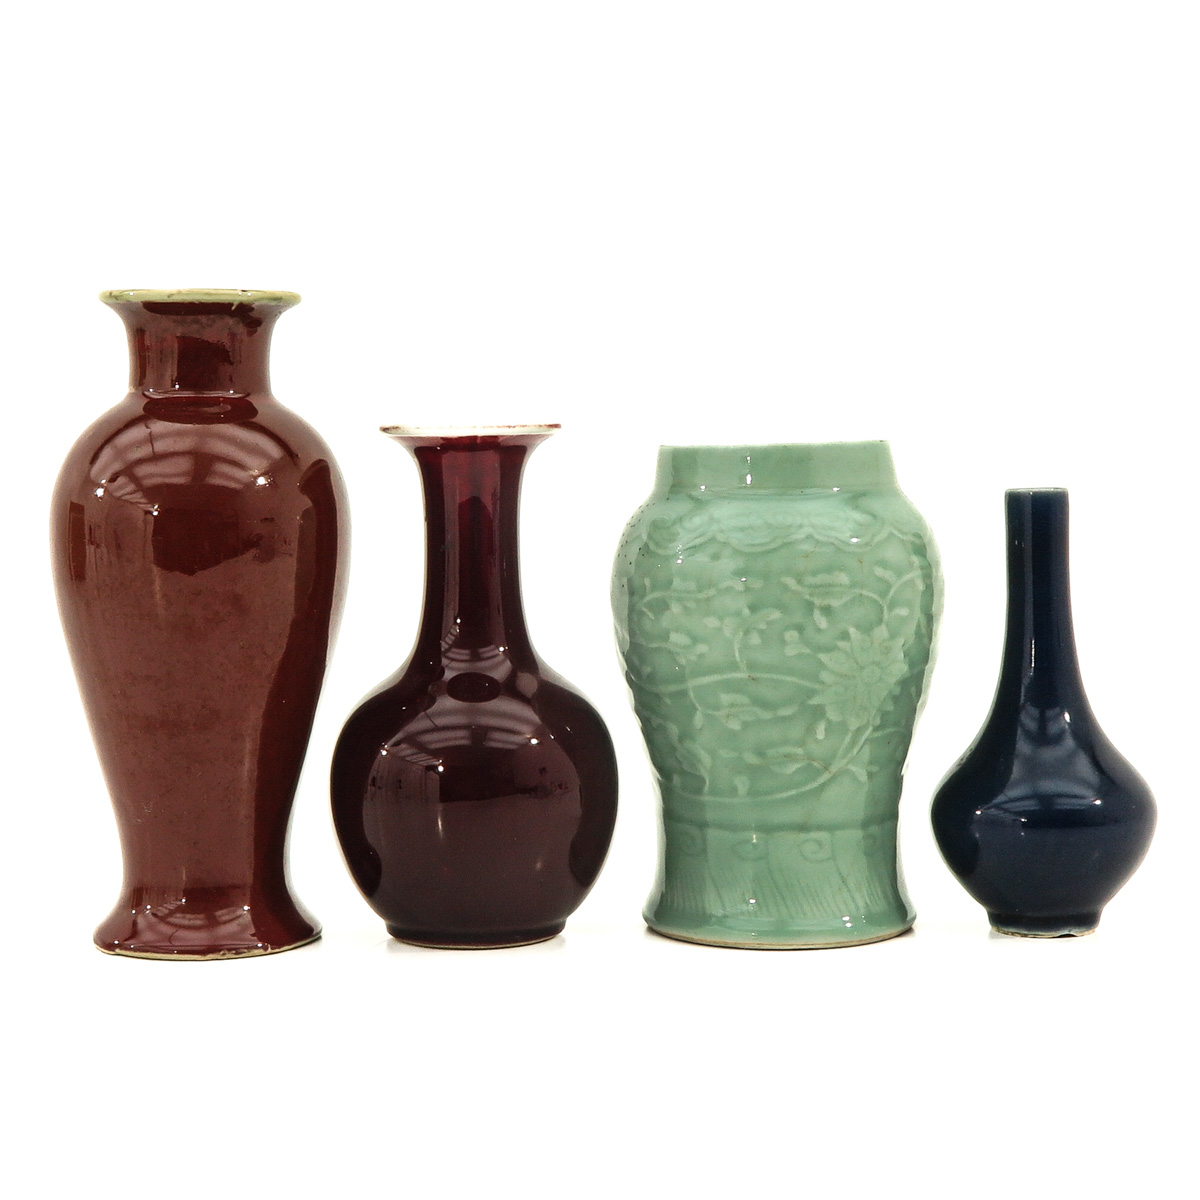 A Collection of 4 Monochrome Decor Vases - Image 3 of 10